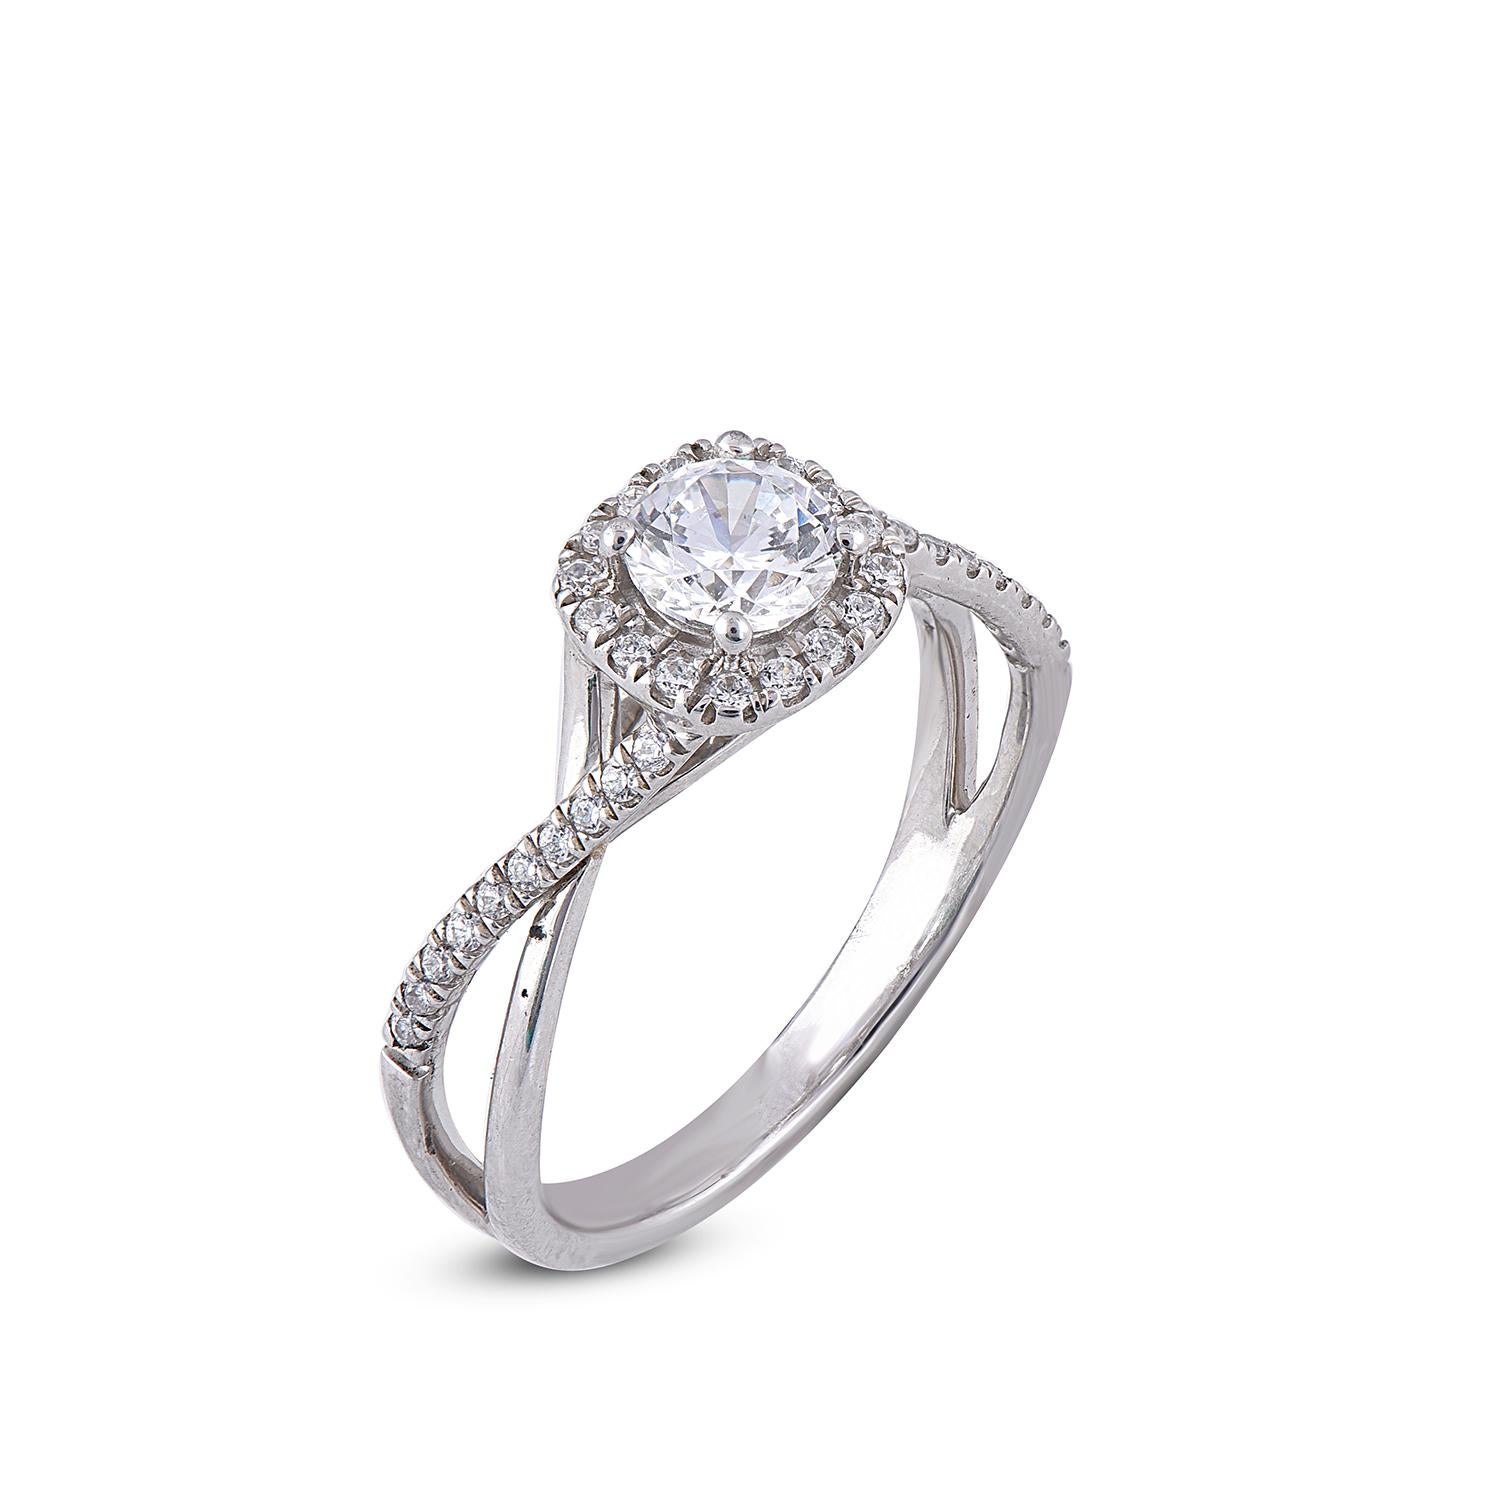 Stunning and classic, this diamond ring is beautifully crafted in 14 karat white gold engagement ring features 0.55 ct of centre stone and 0.20 ct lined with rows of 36 round sparkling diamonds in secured prong settings. The diamonds are natural,